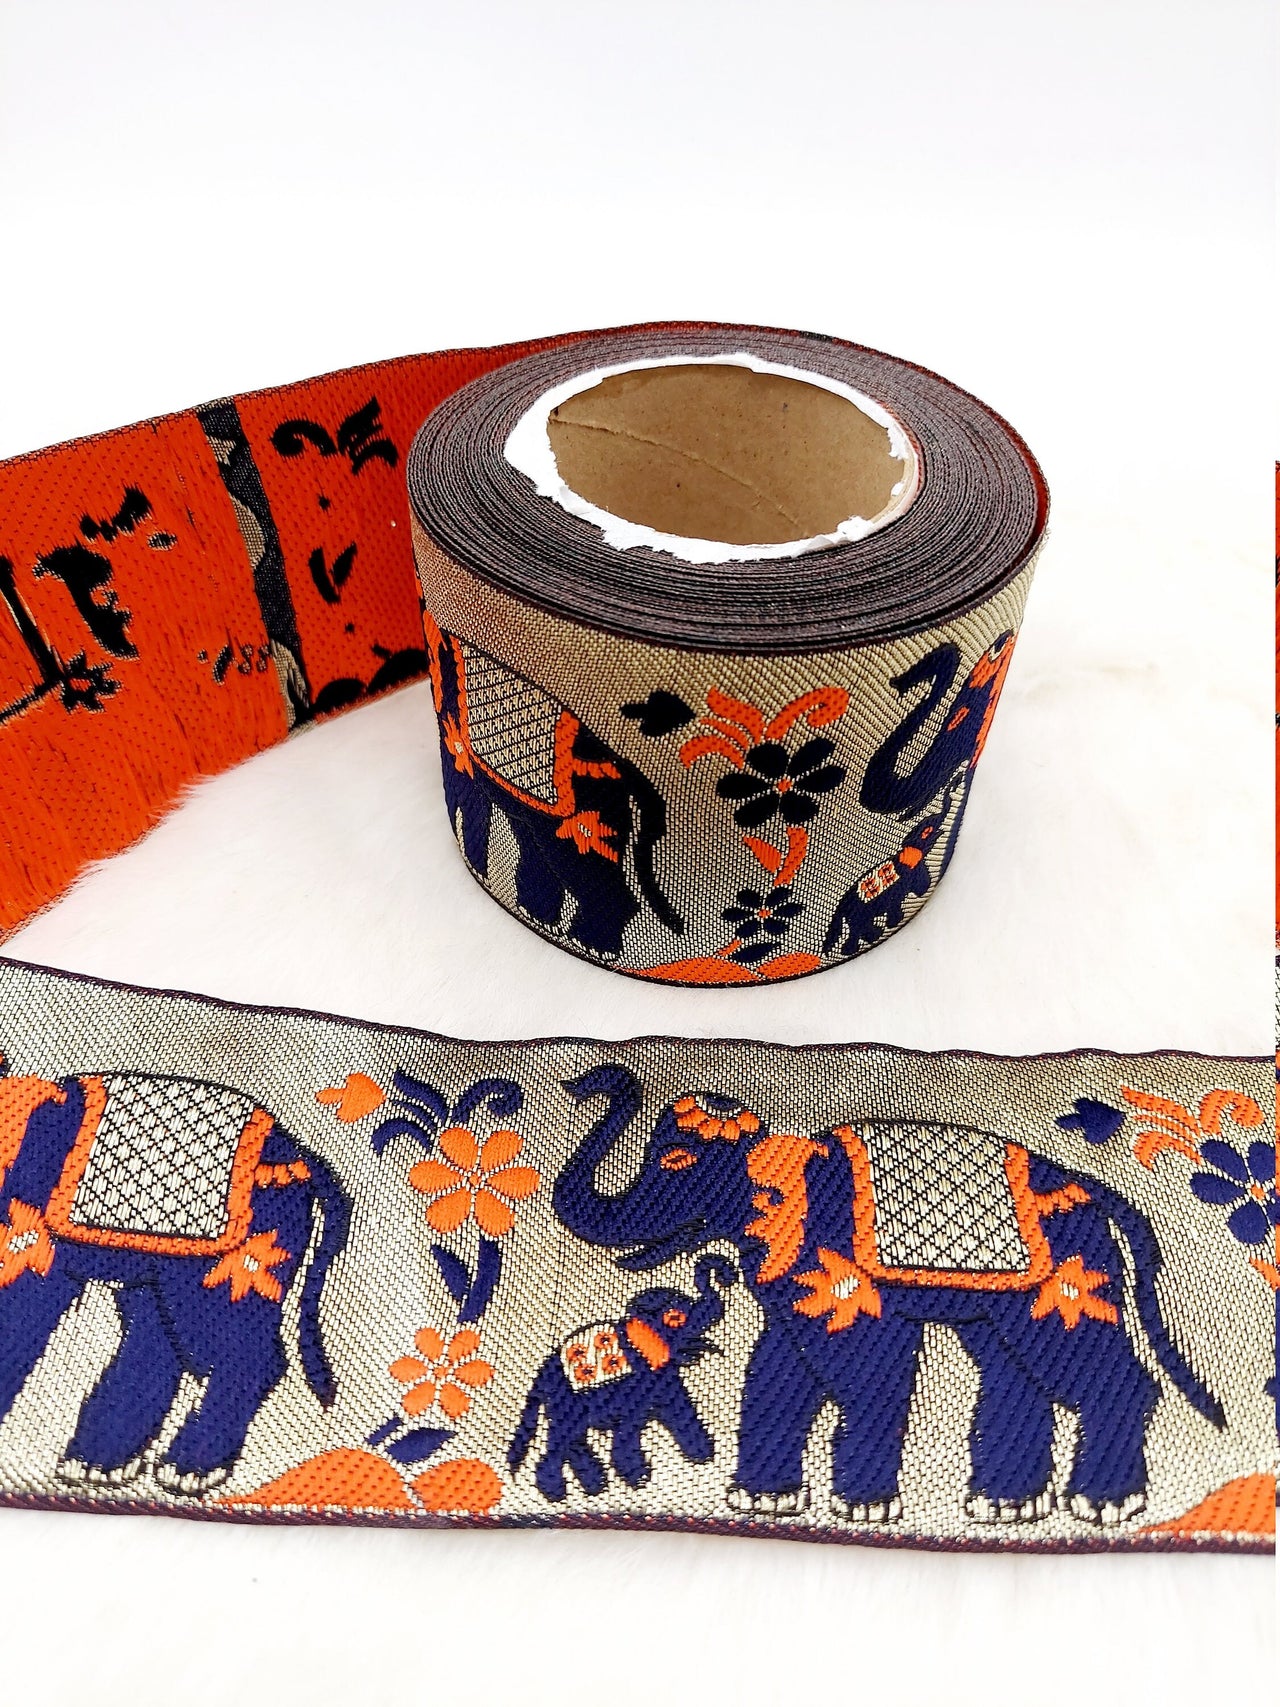 9 Yards Antique Silver Jacquard Brocade Saree Border Trim with Elephant Woven in Navy Blue and Orange, Decorative Trim